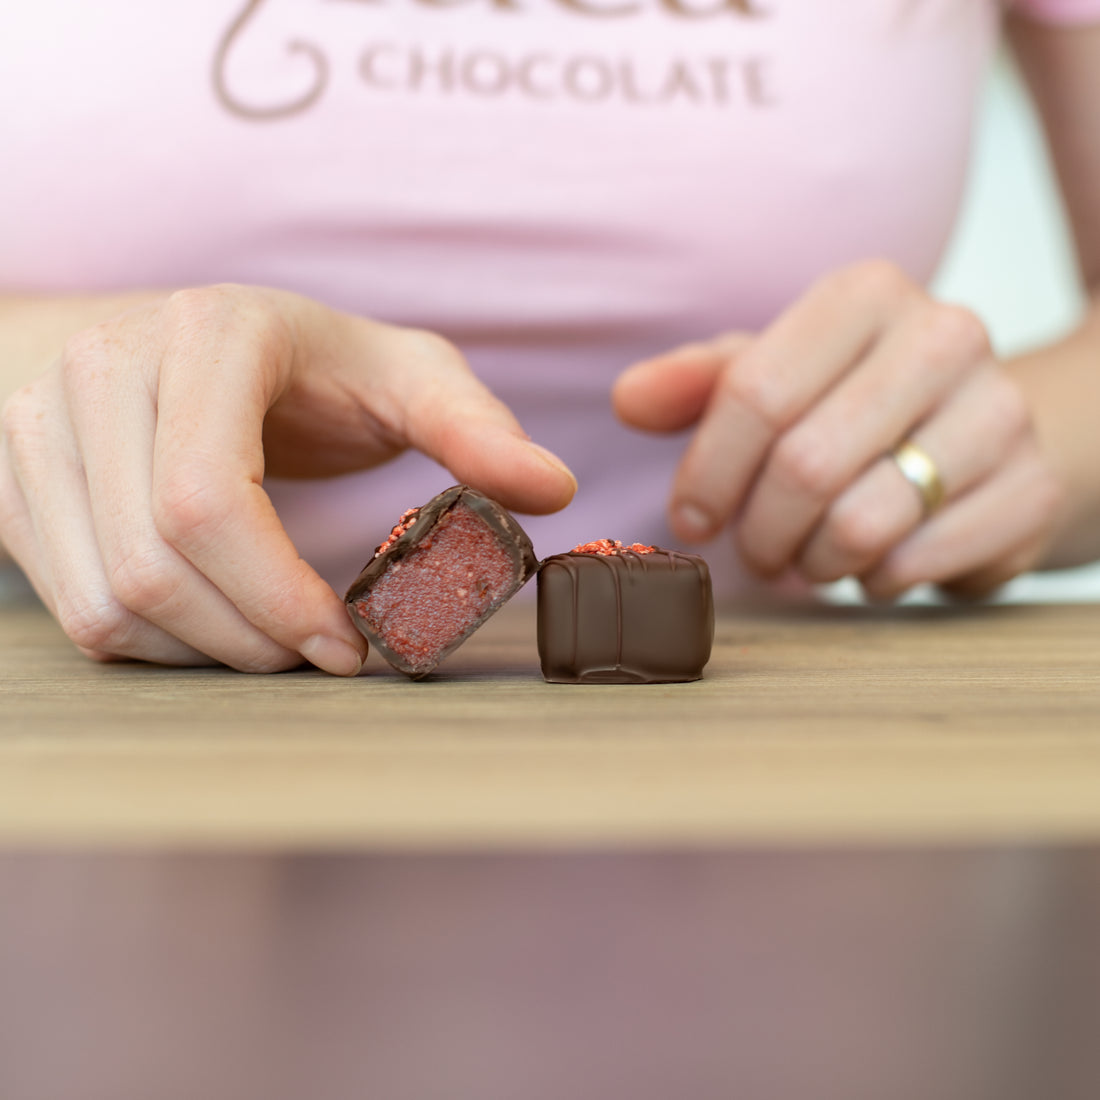 Can you eat chocolate on a plant-based diet?